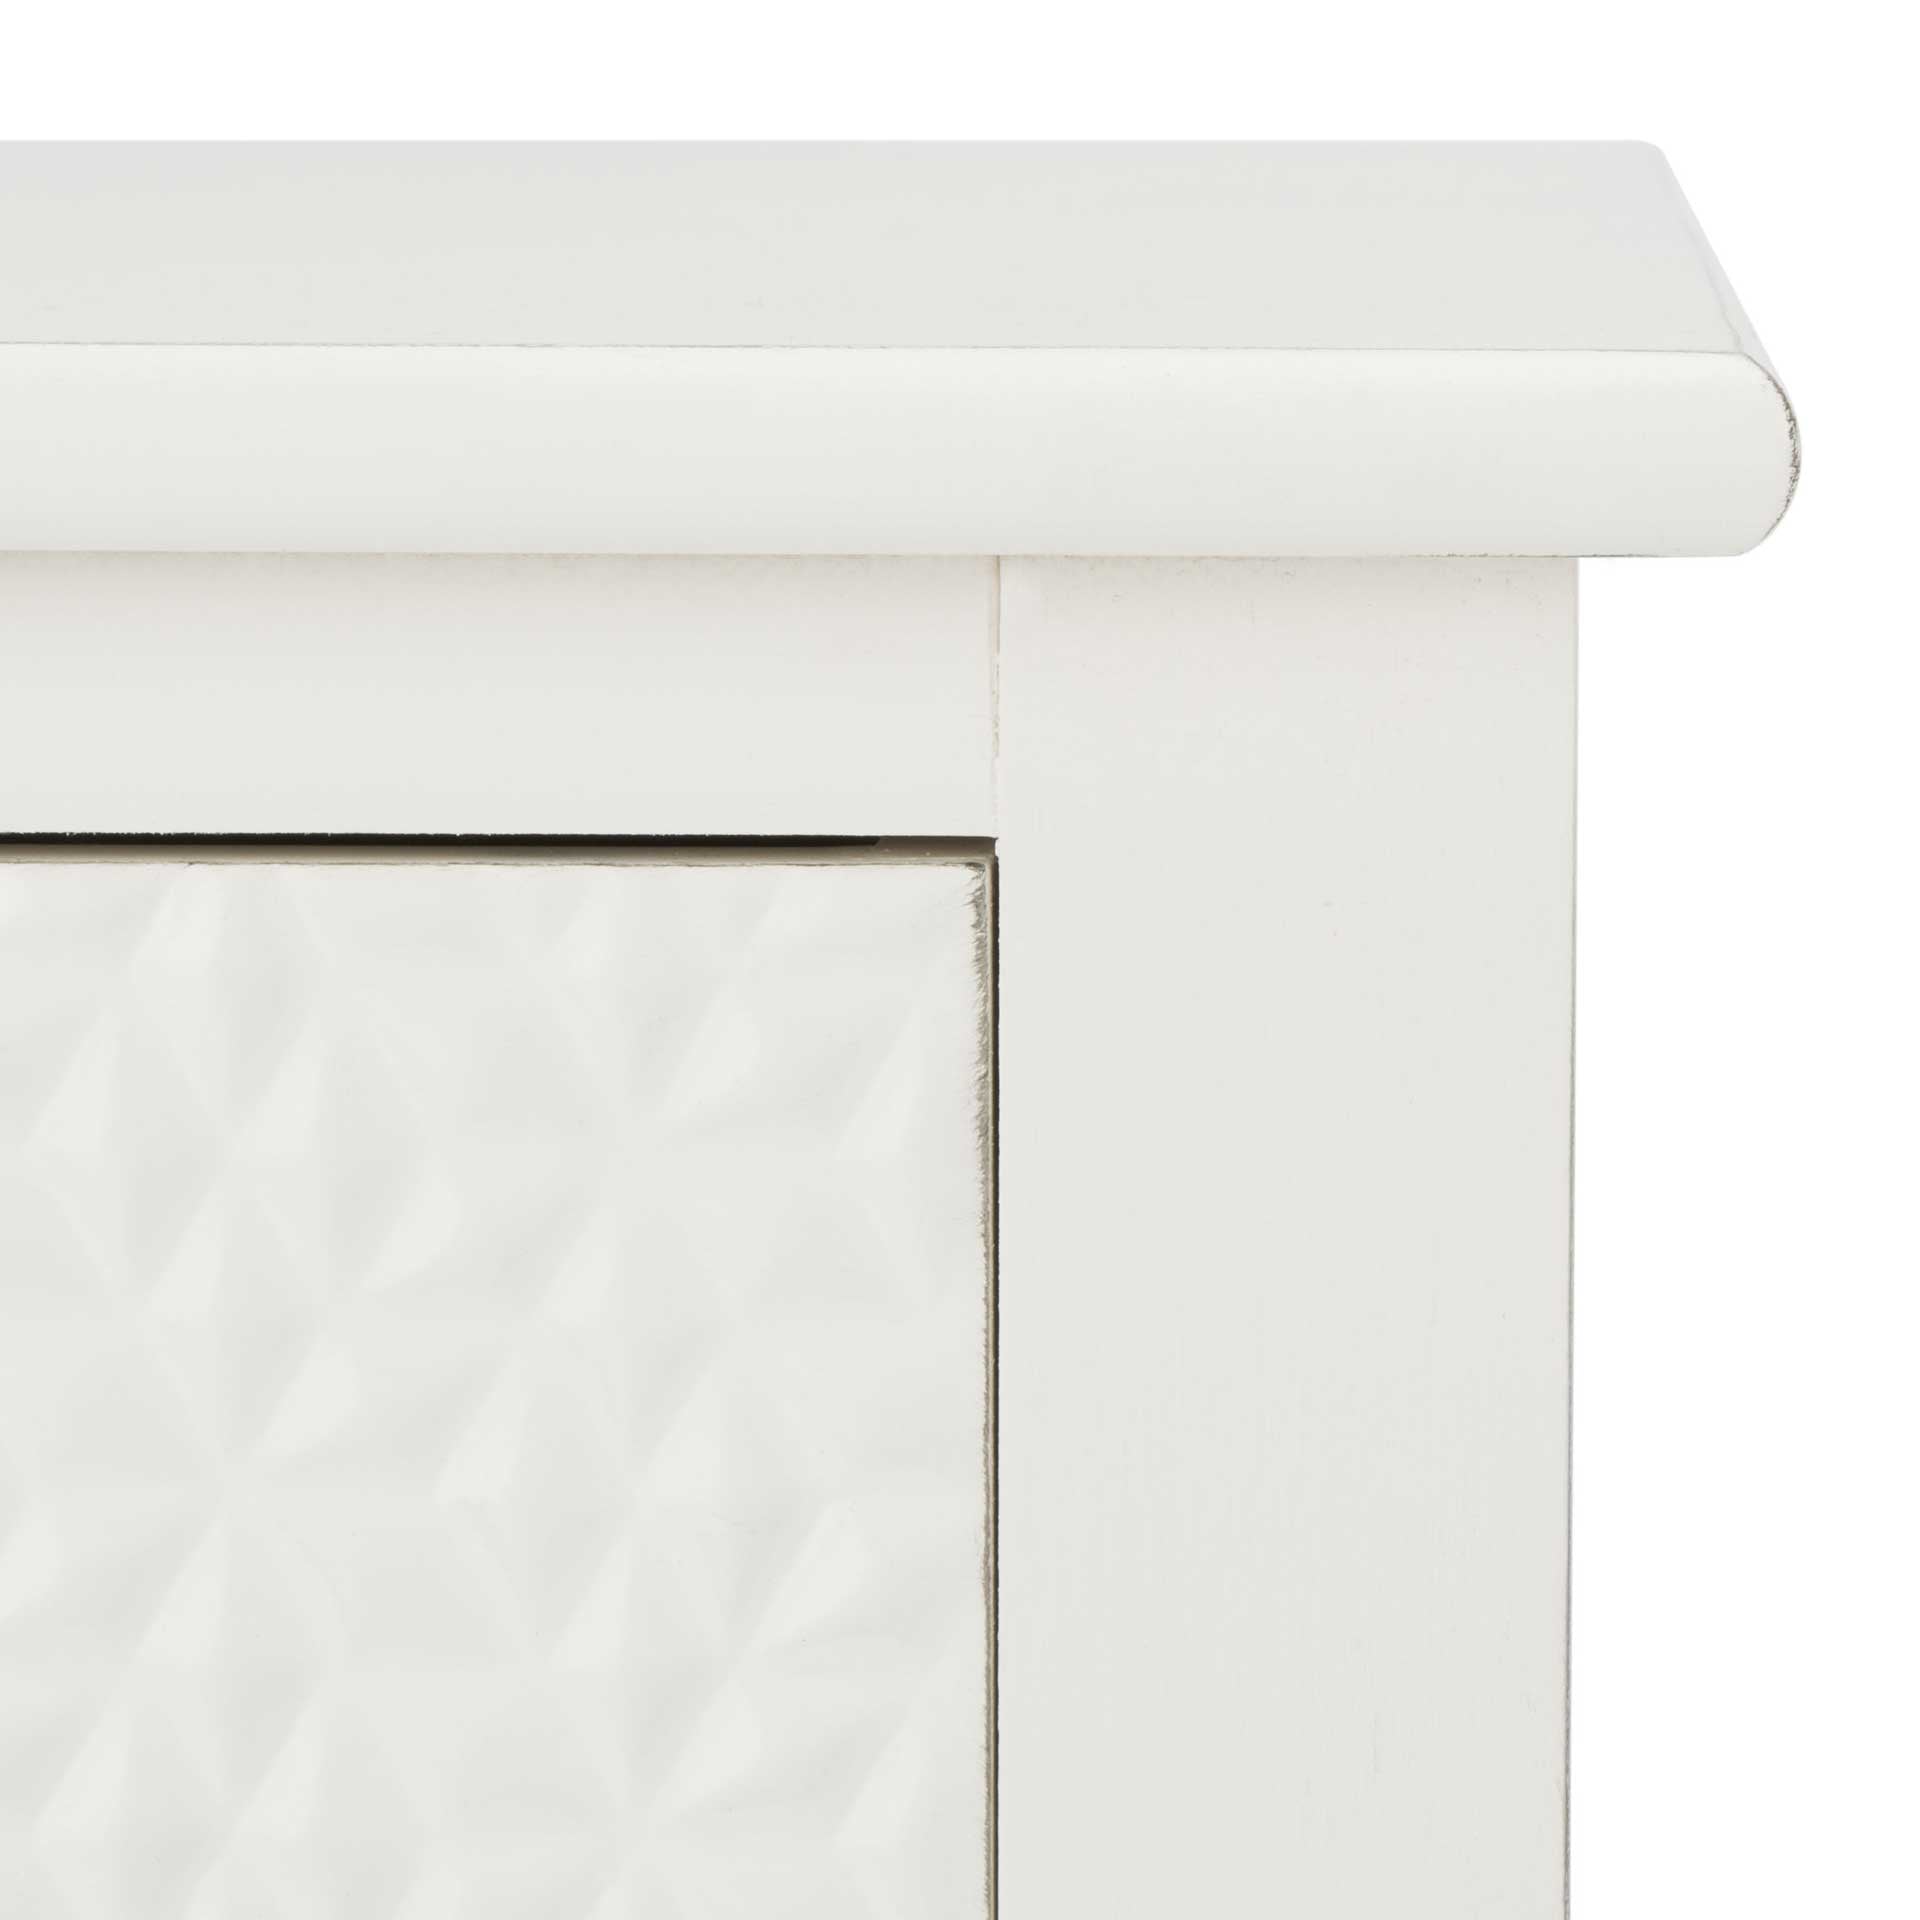 Haleigh 1 Drawer Accent Table Distressed White